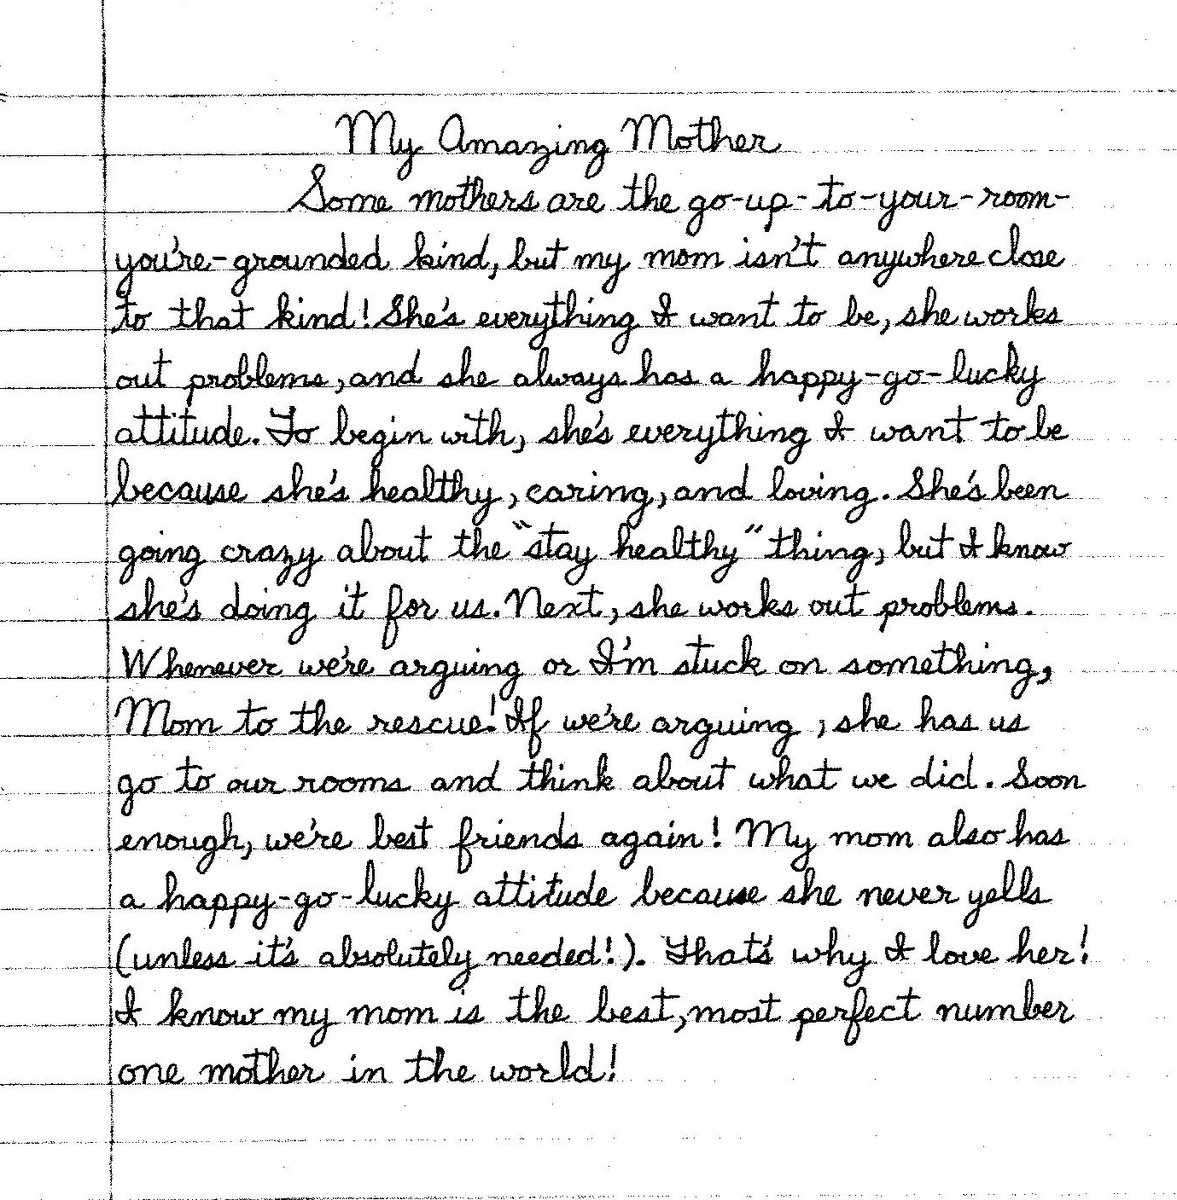 Personal narrative essay about mother